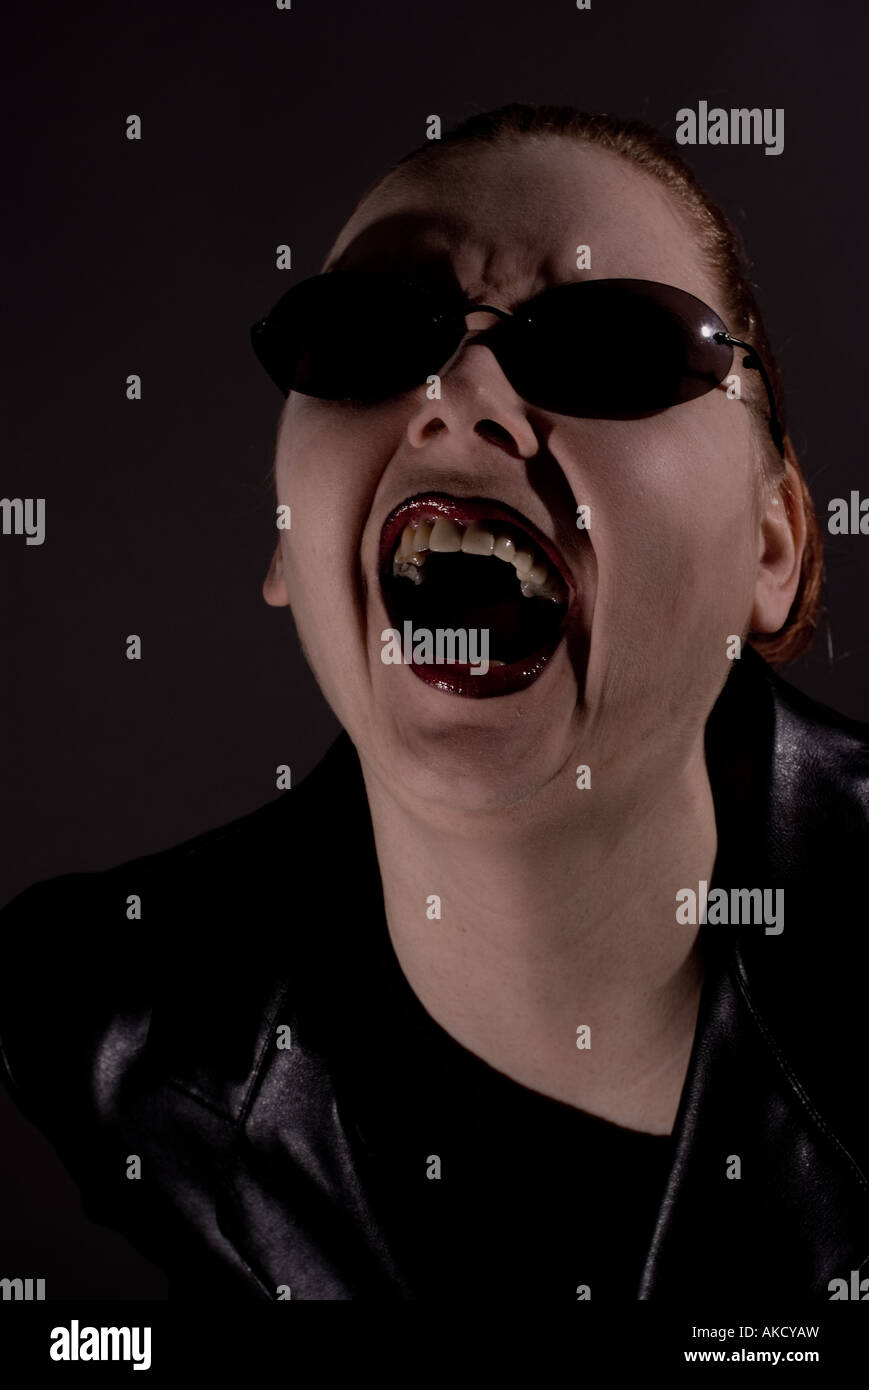 Screaming woman with sunglasses Banque D'Images